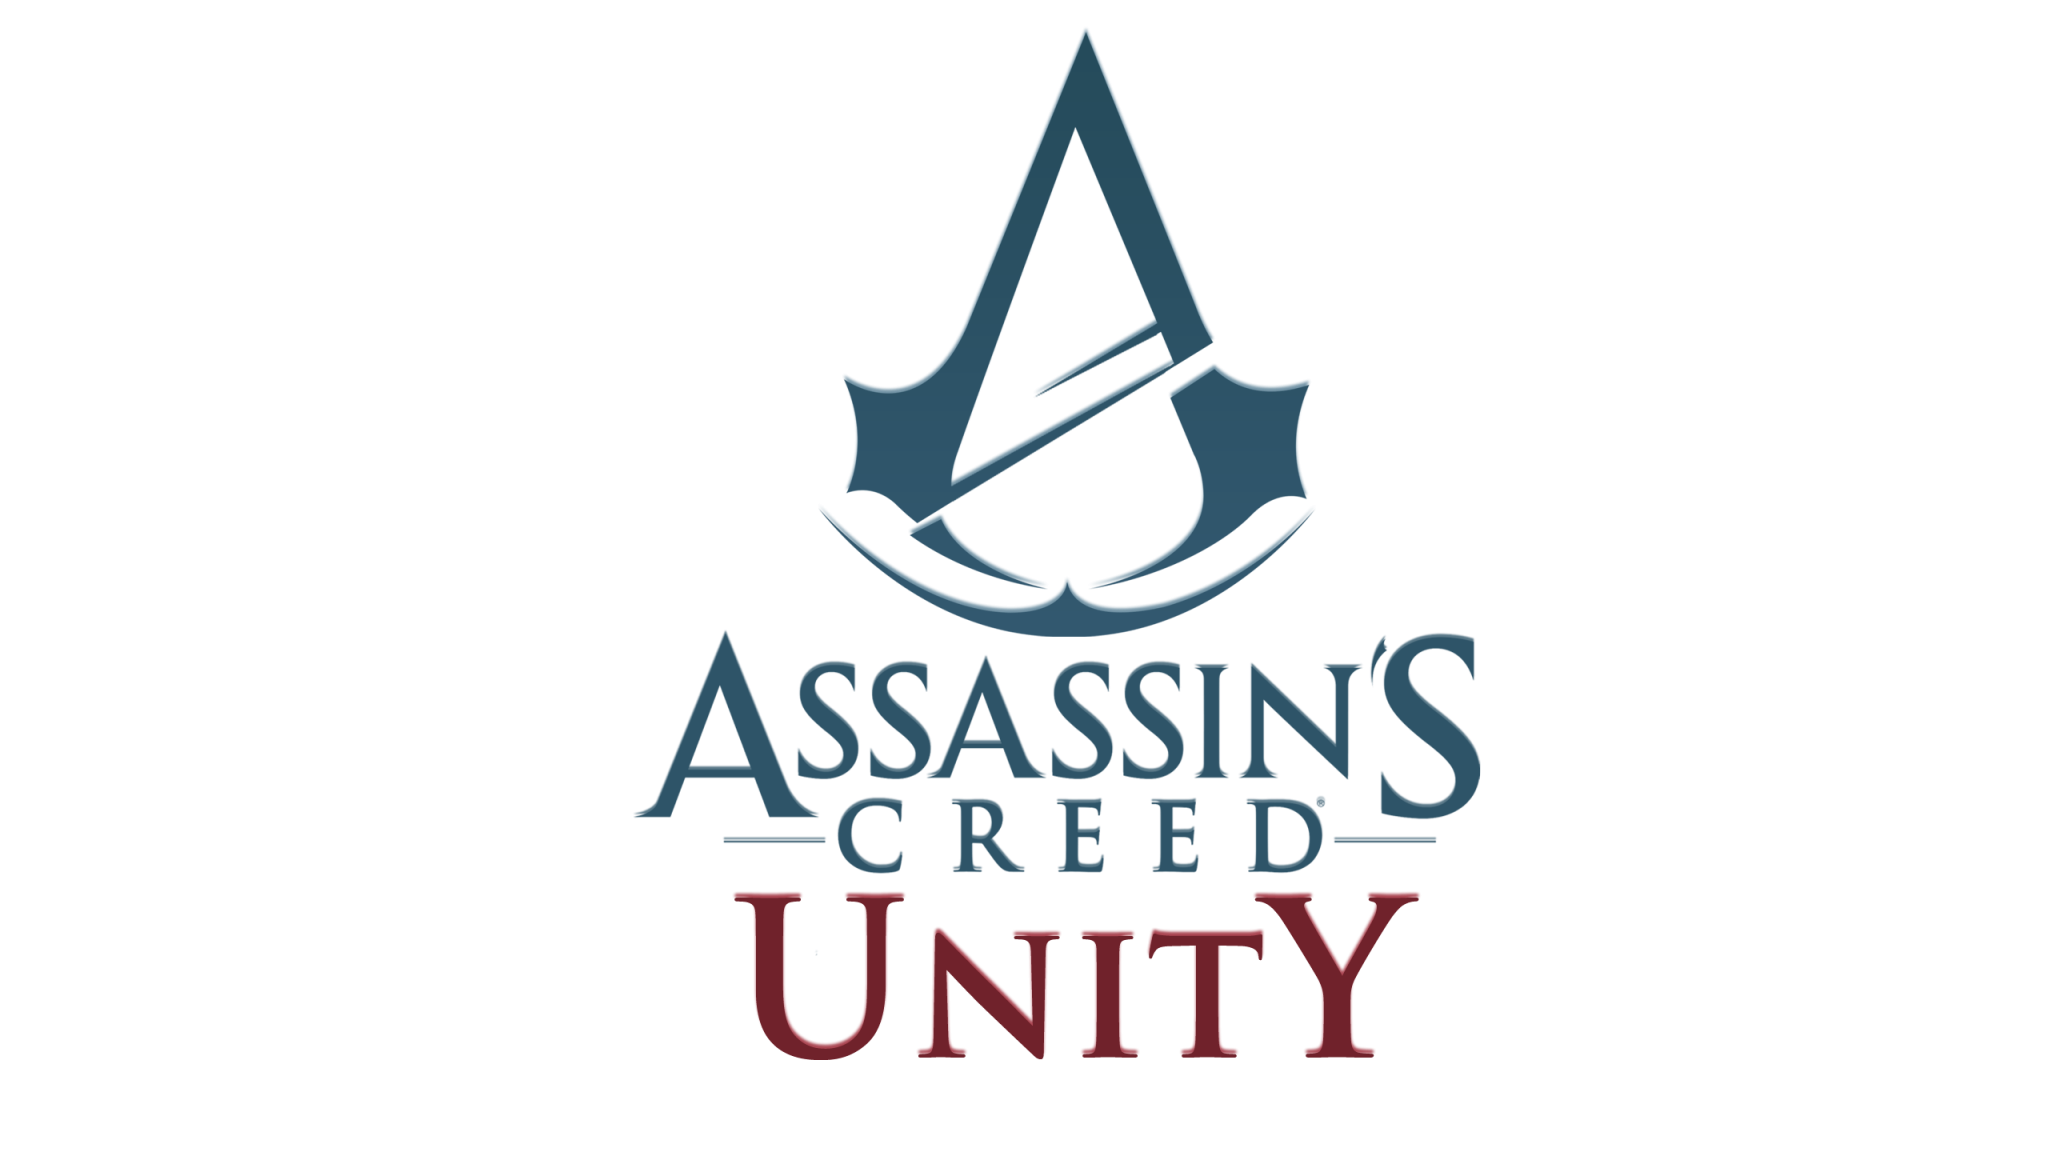 assassins creed unity game ultimate trainer